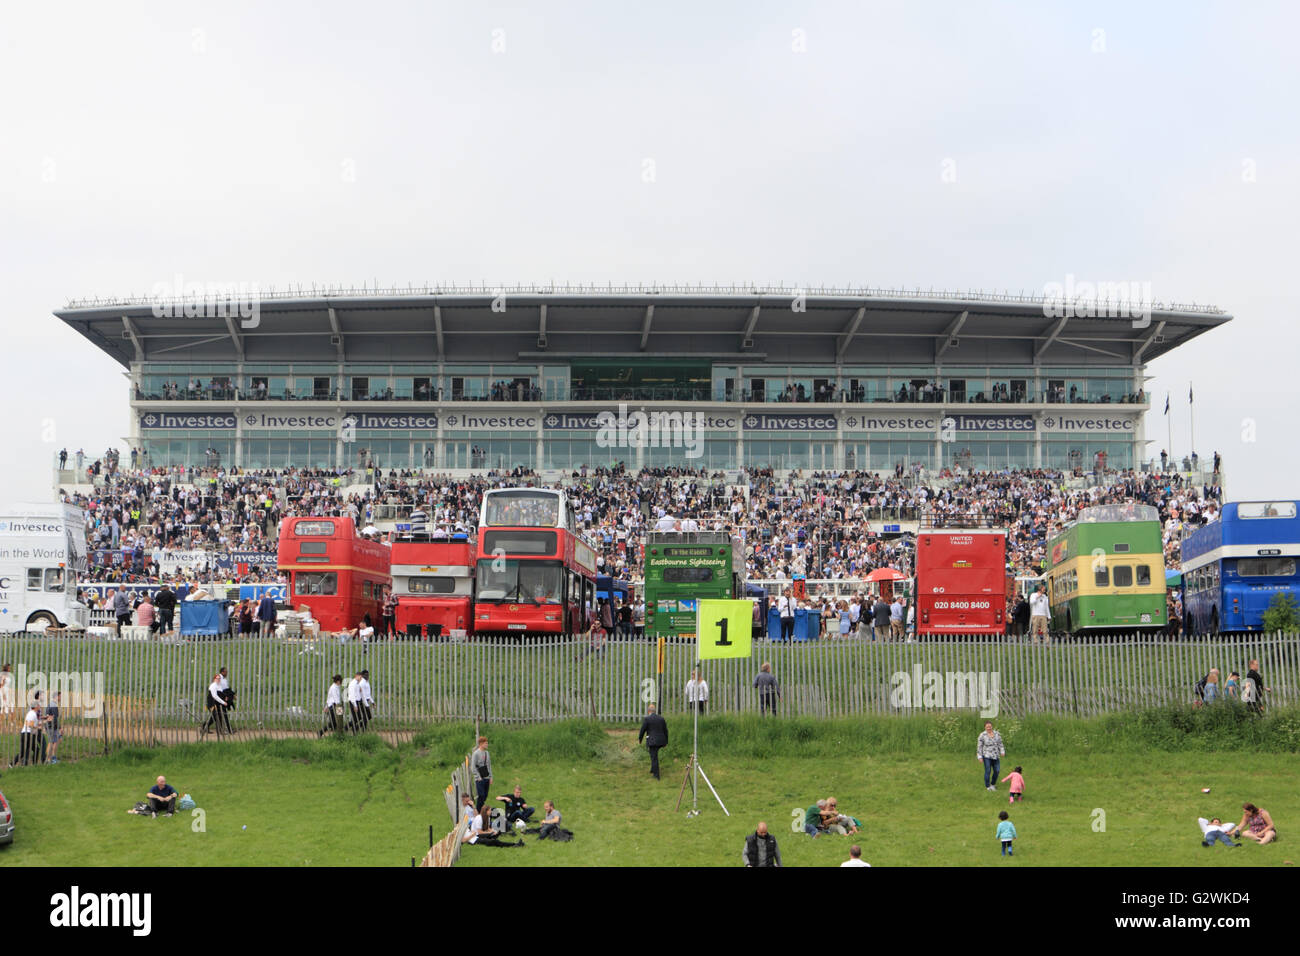 Epsom Downs, Surrey, England, UK. 4th June 2016. Open deck buses in front of the grandstand on Derby Day at Epsom Downs race course, where the world famous flat race the Investec Derby is the main race of the day. Stock Photo